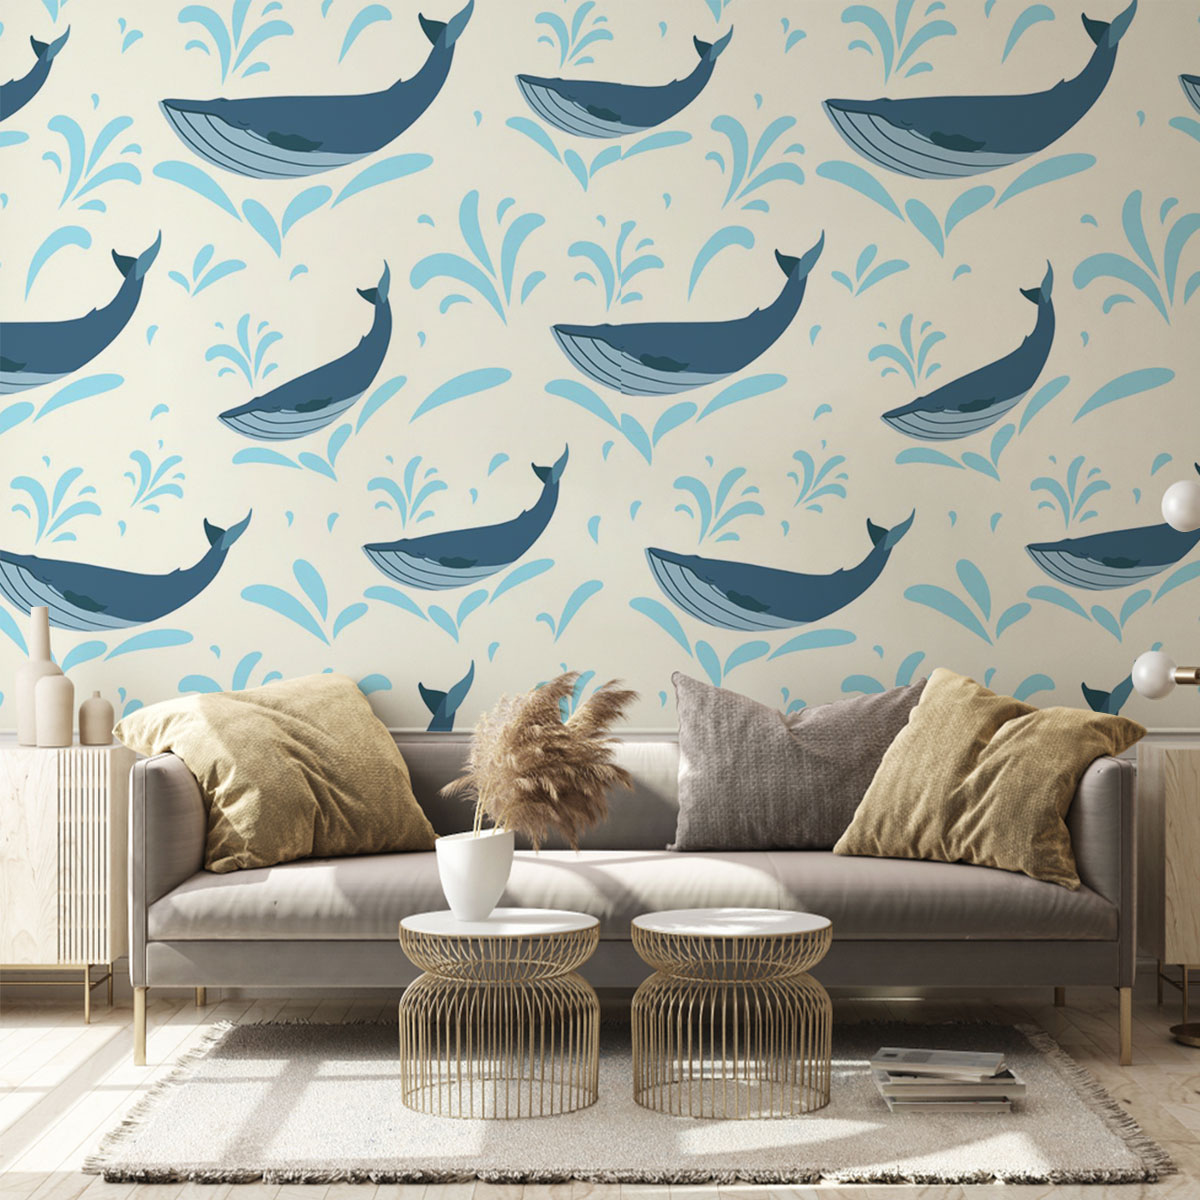 Brething Blue Whale Wall Mural